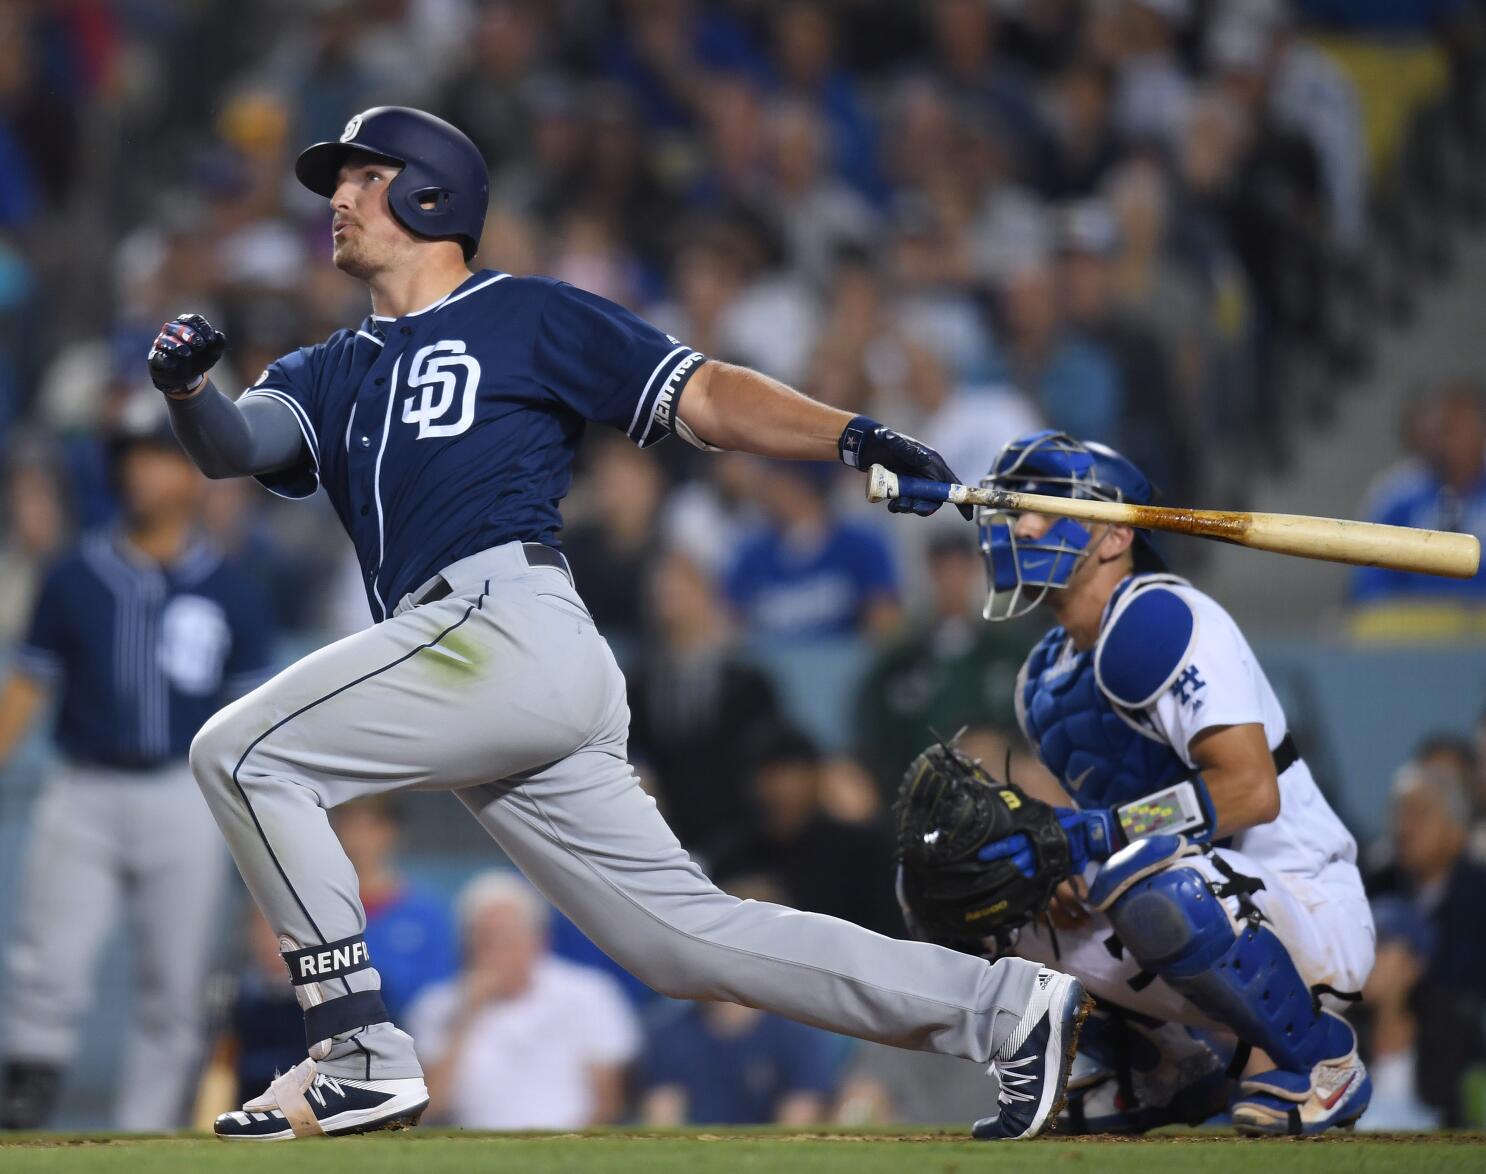 Hunter Renfroe homers in 4th straight game as Padres win